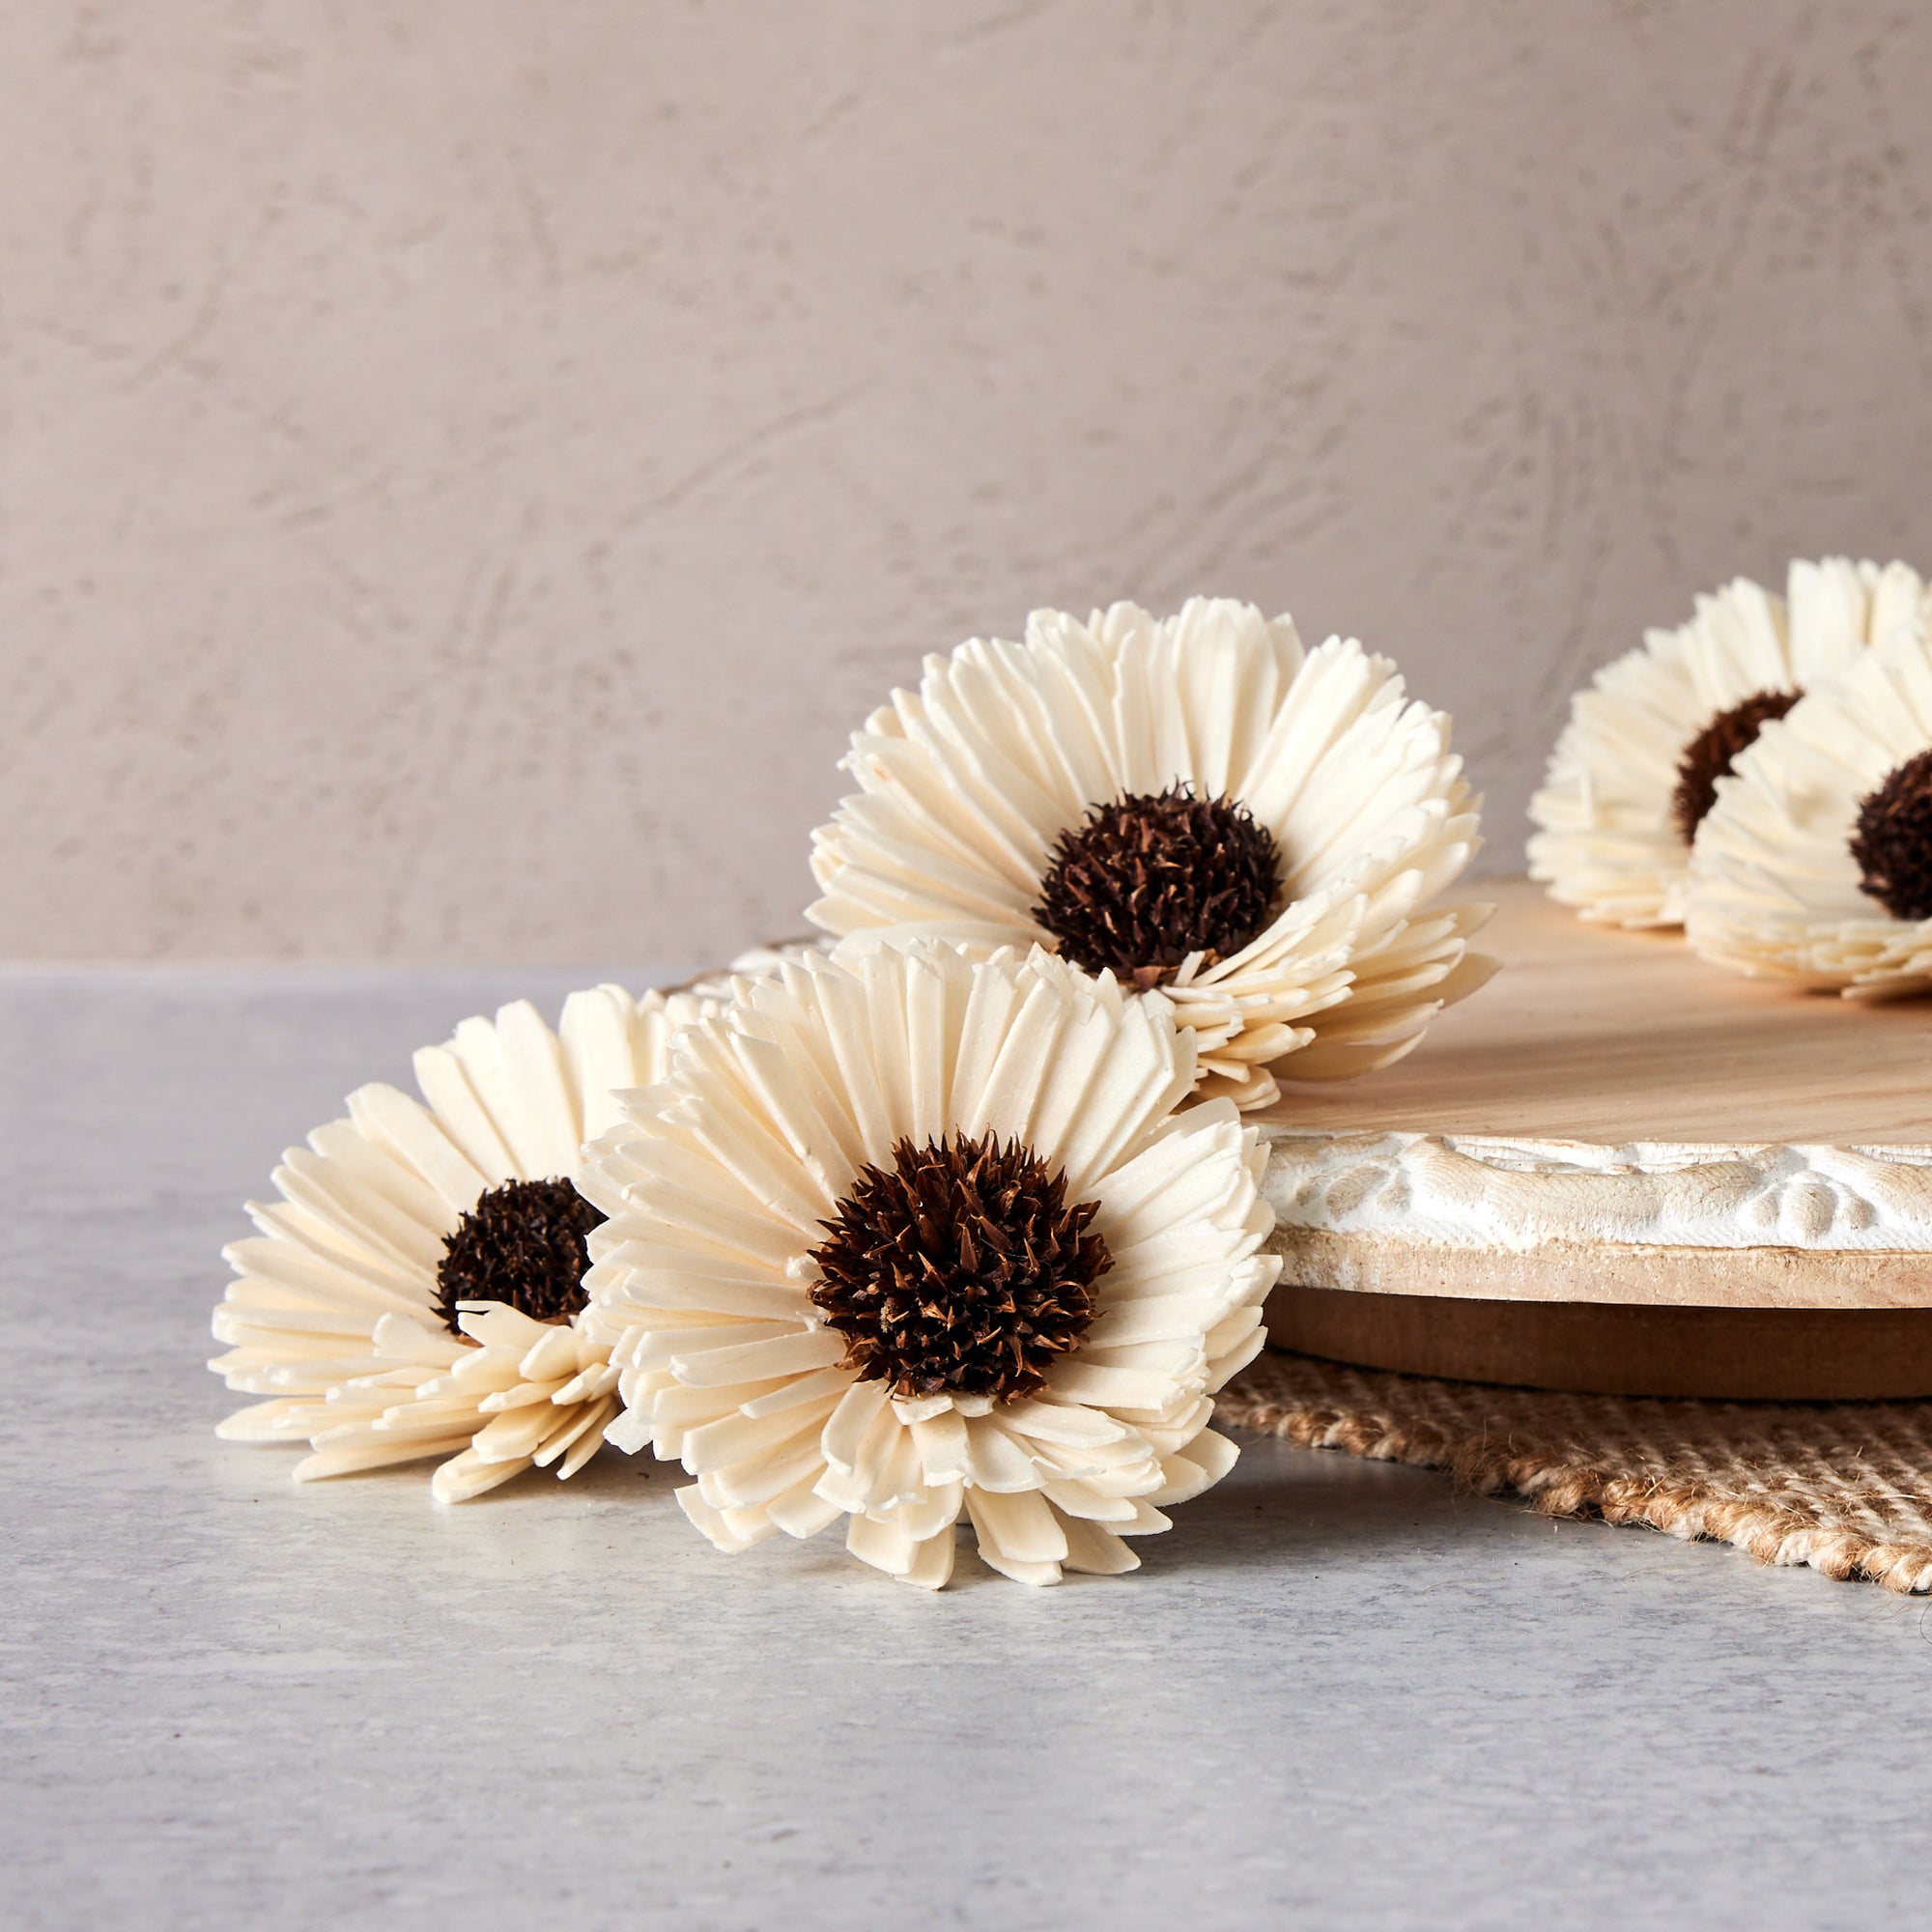 Sunflower - set of 12 - 2.5 inches